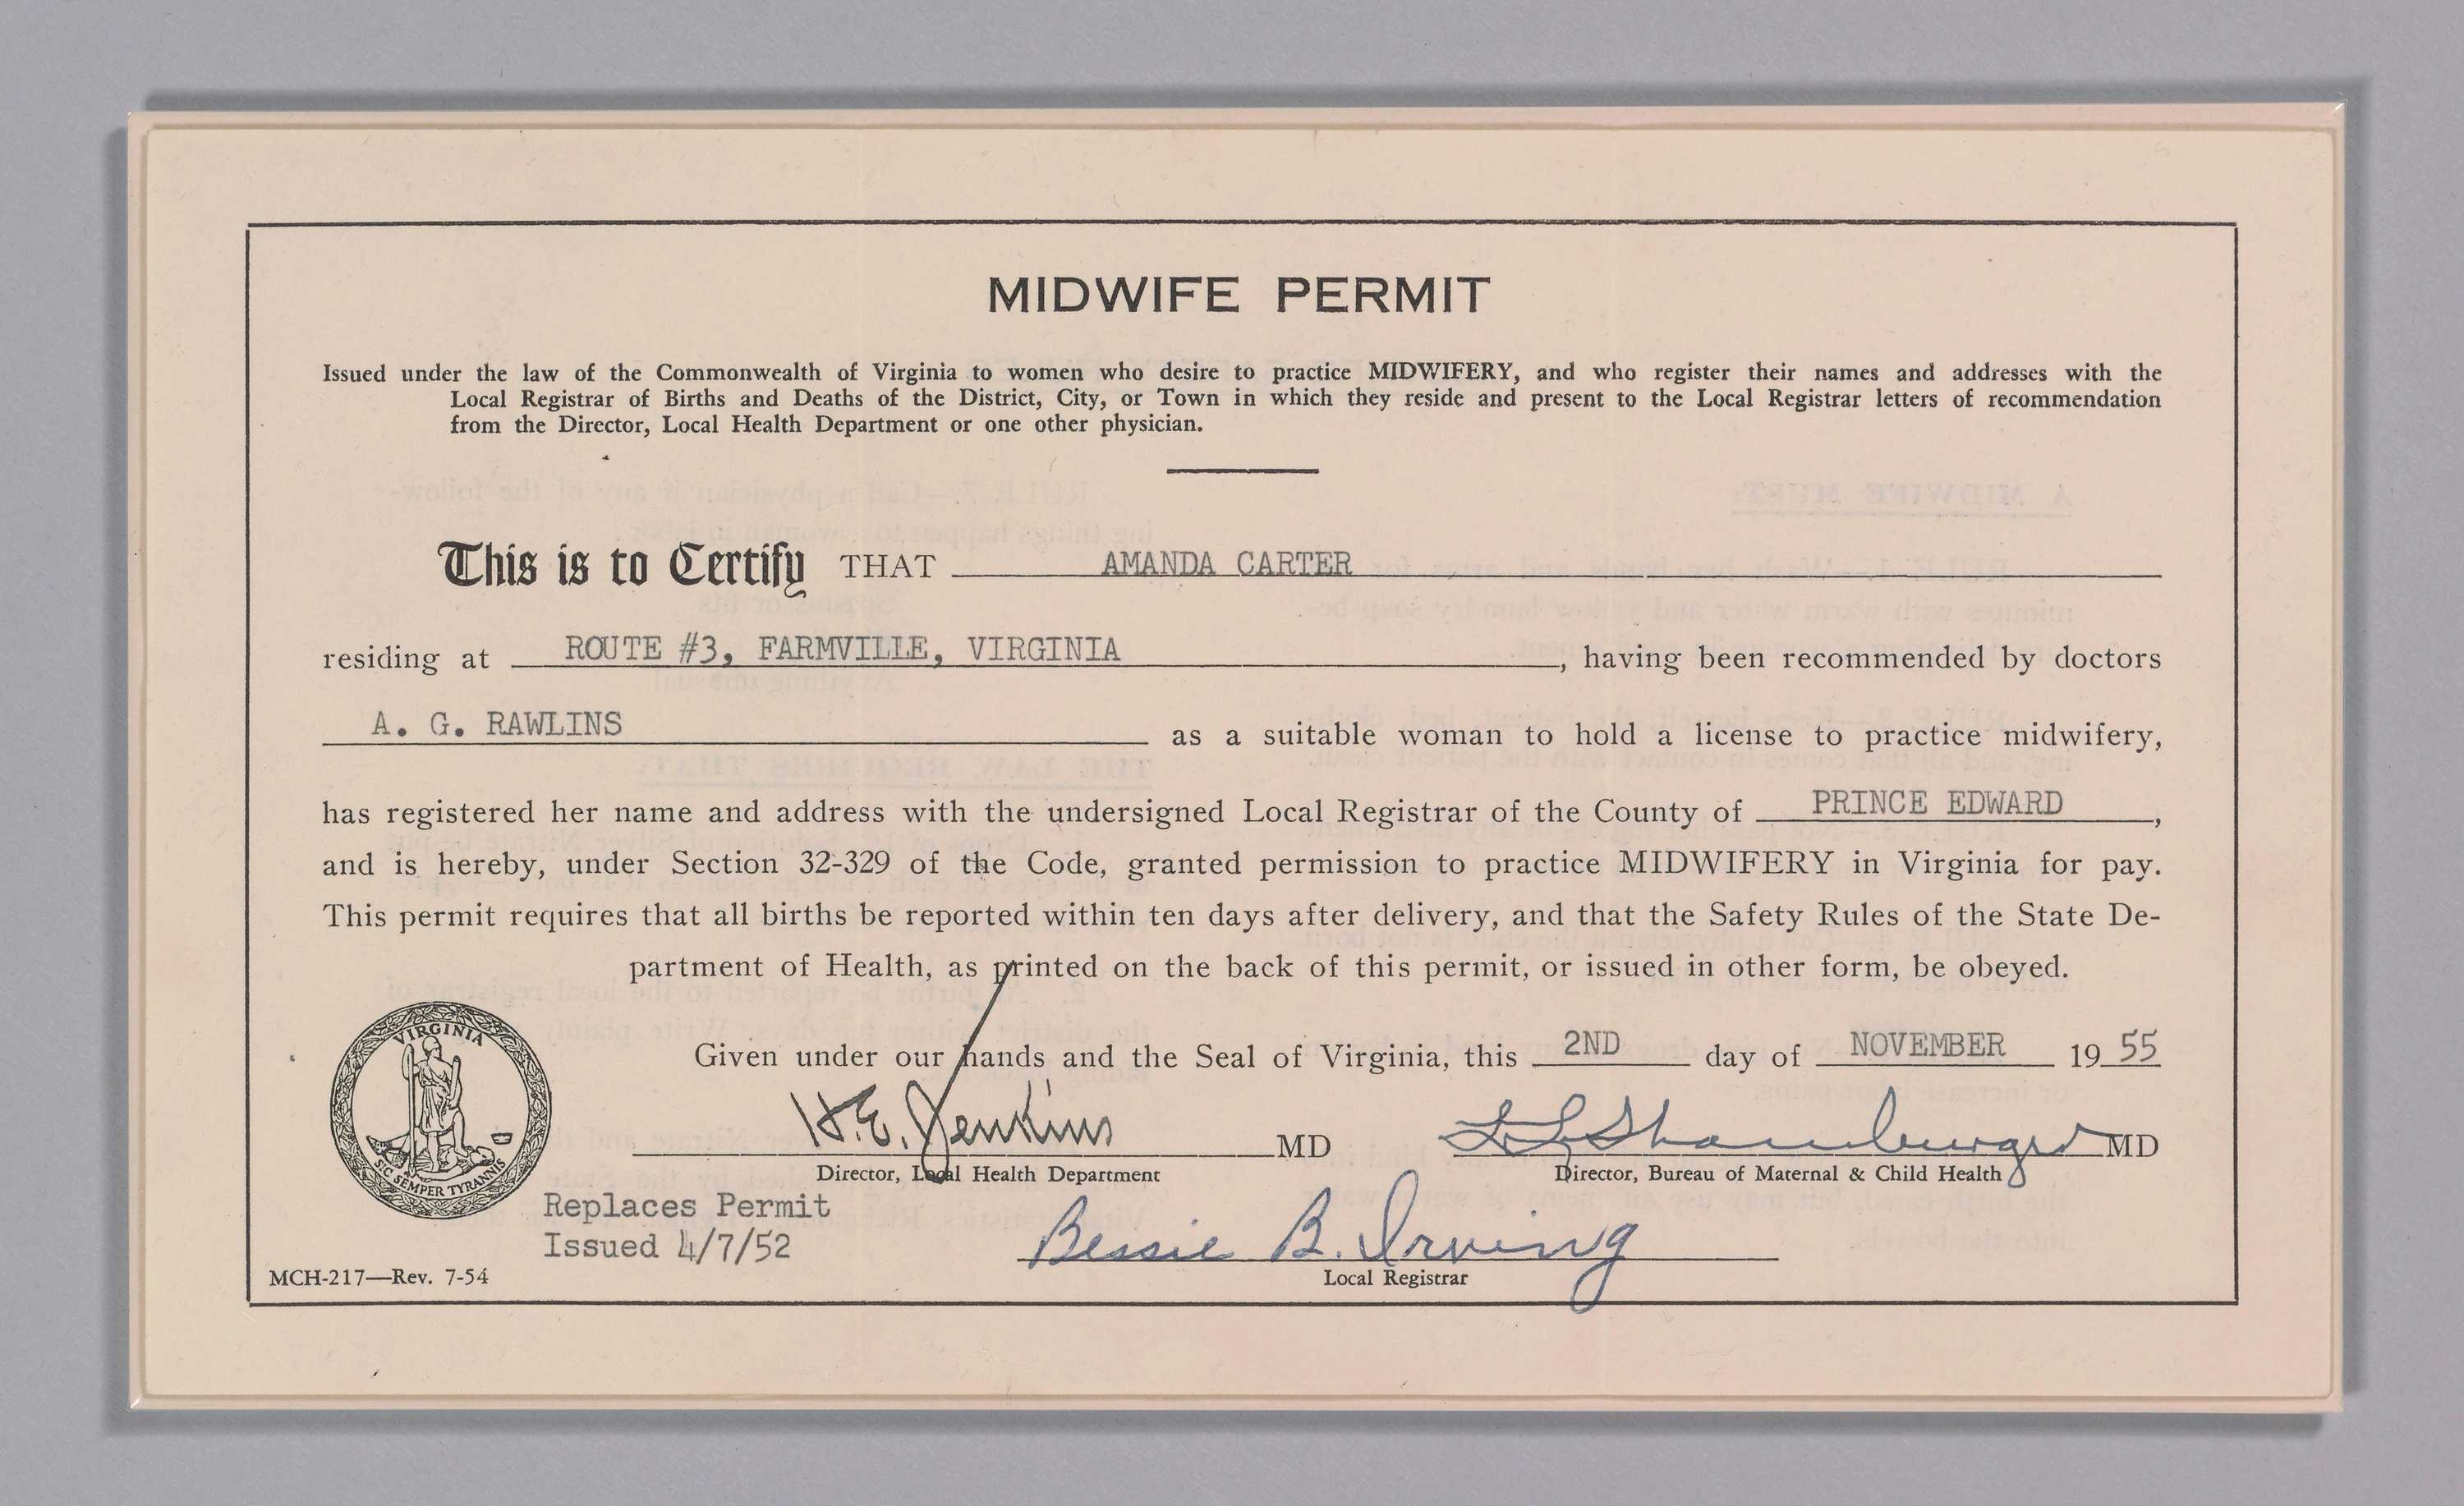 A midwife permit issued to Amanda Carter and dated November 2, 1955.